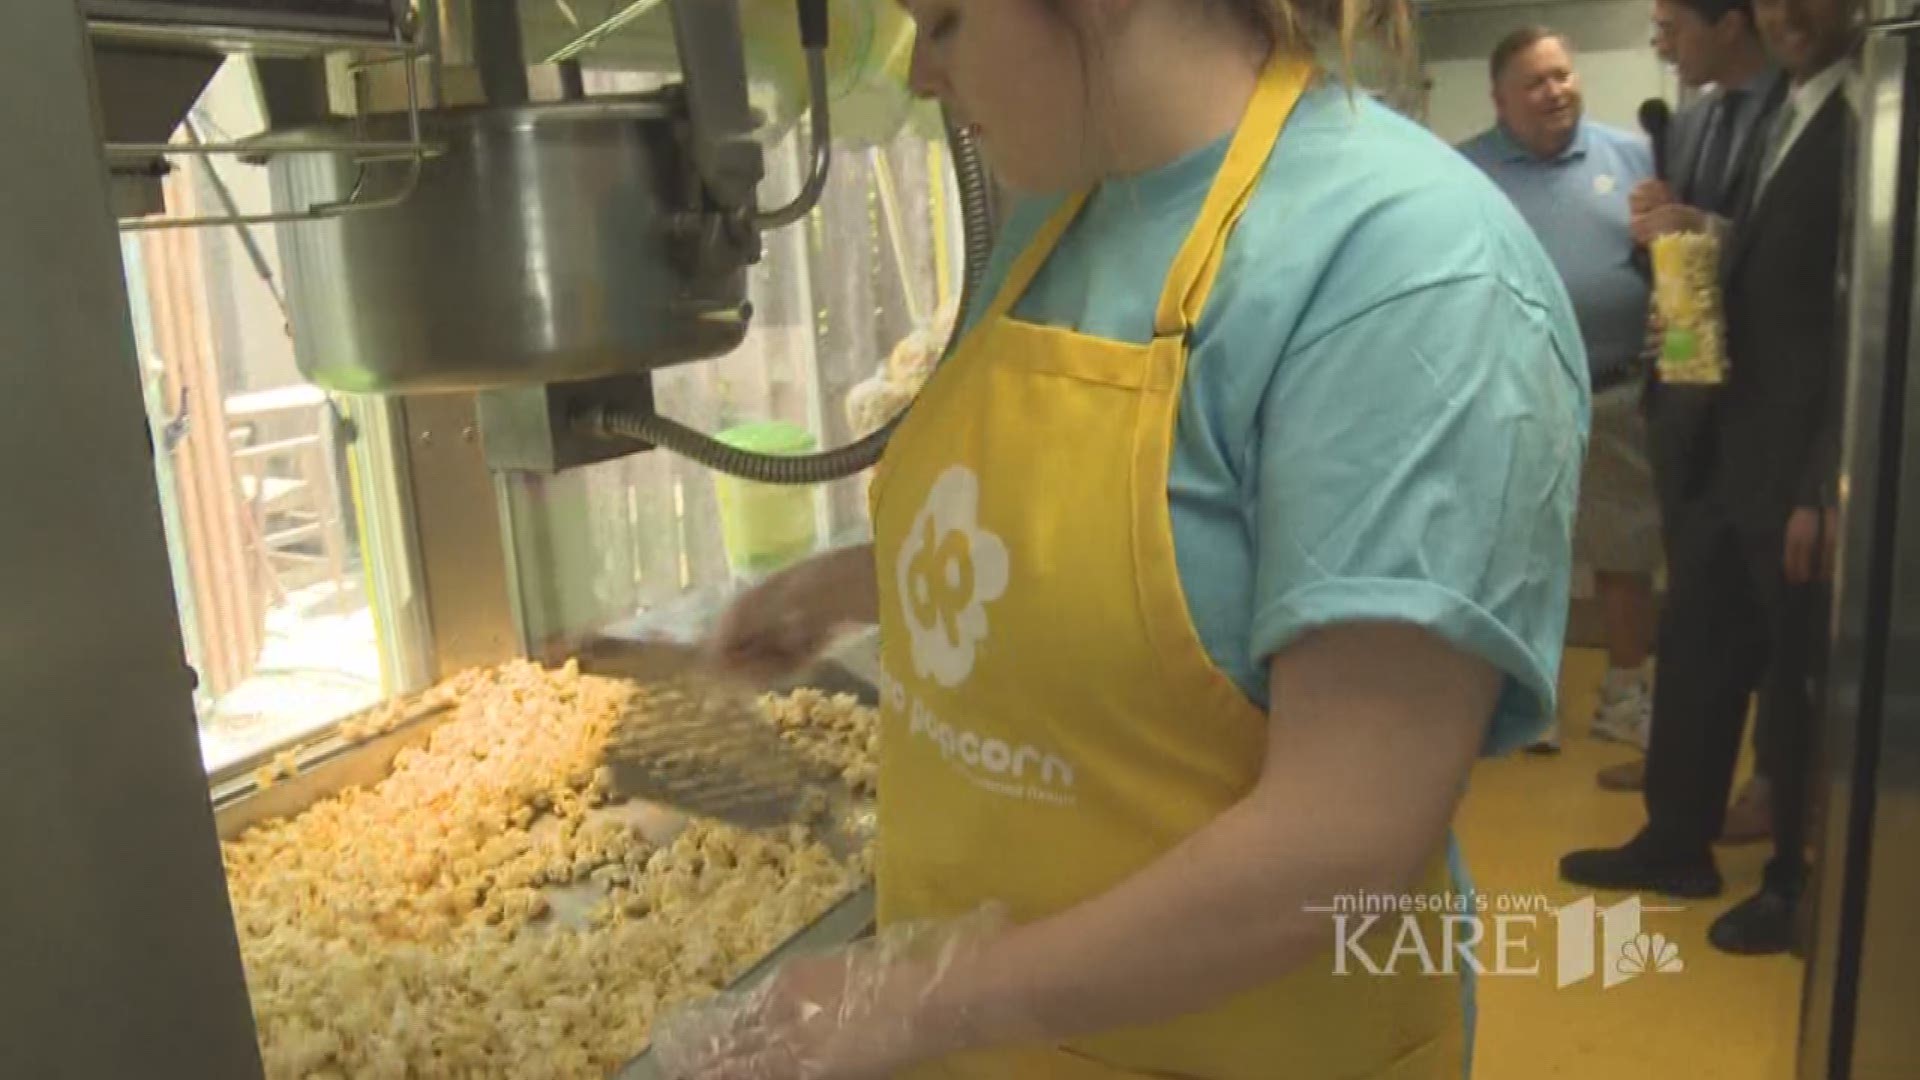 Mall of America's Doc Popcorn has their first food truck to bring their delicious treats to their fans.